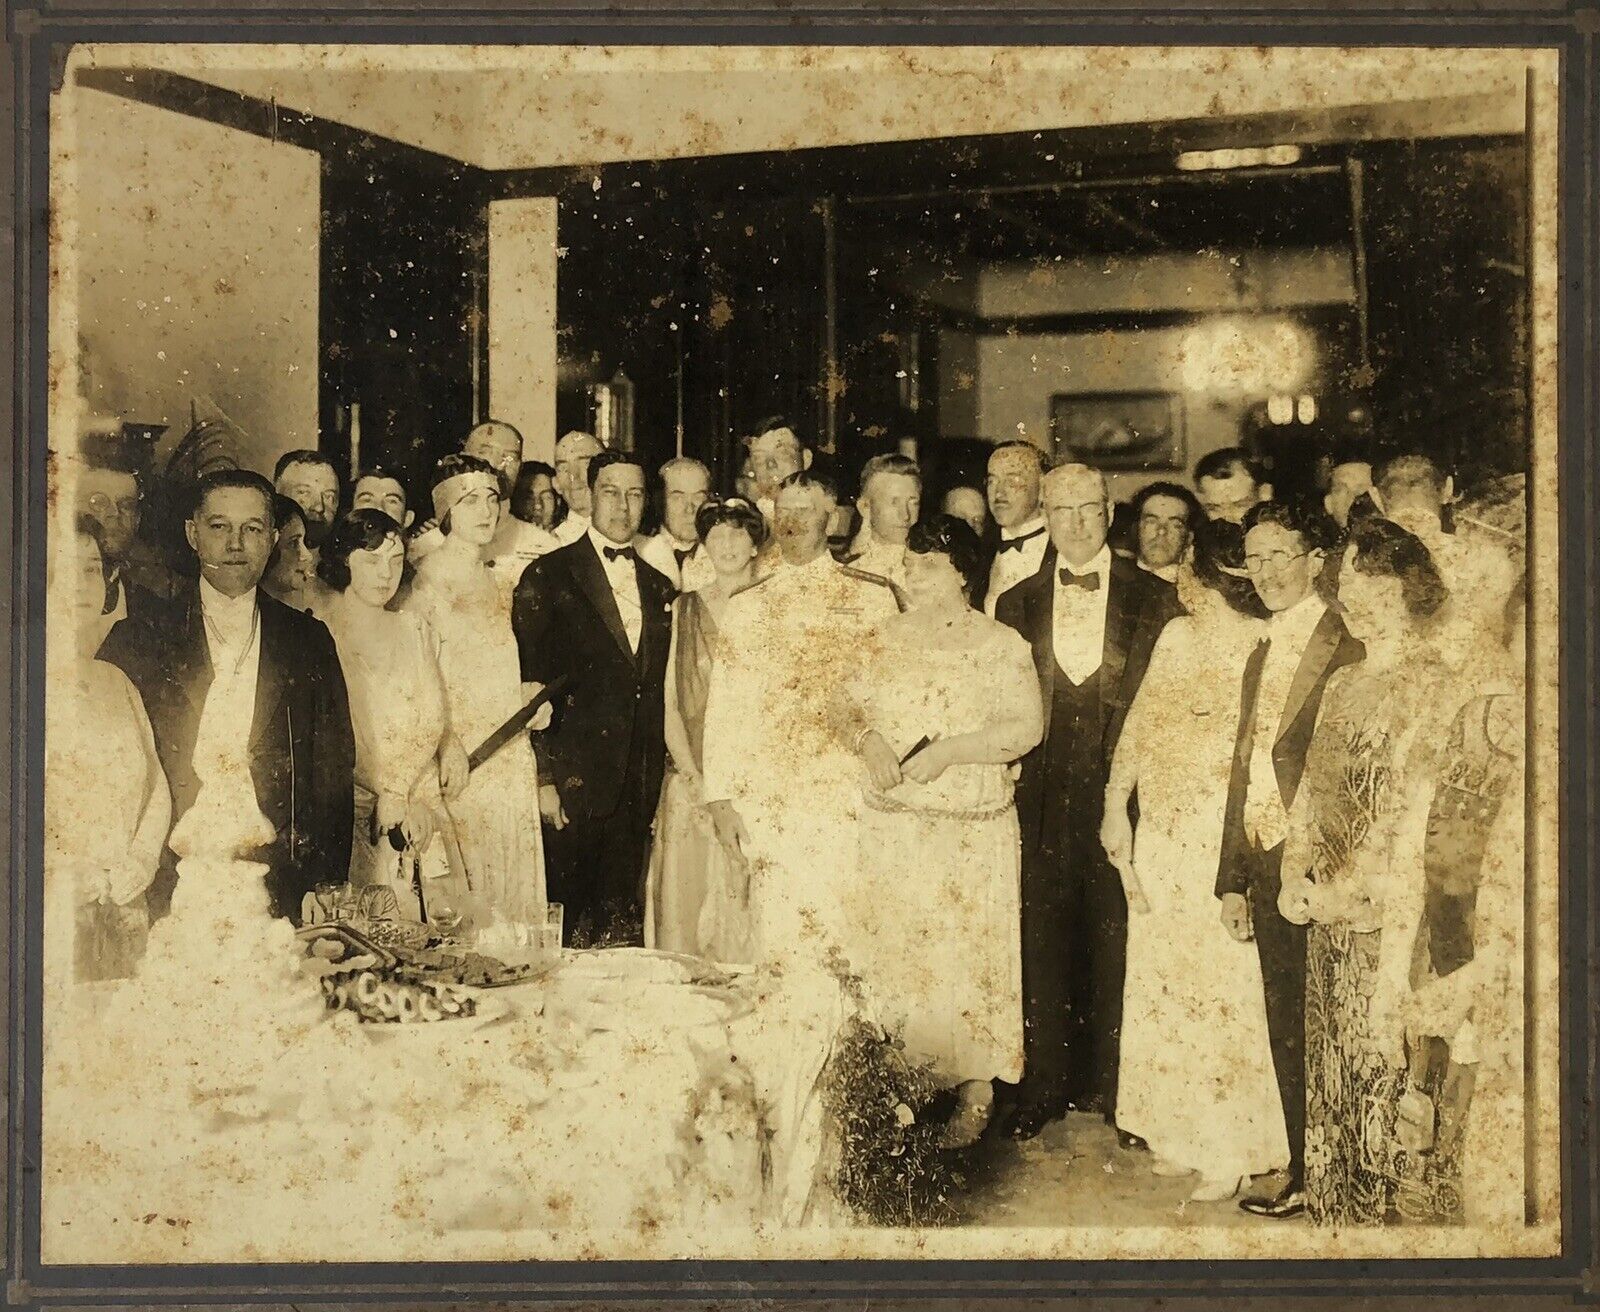  Photo Inaguration Party Giorgetti Mansion Politics Wealhty Puerto Rico 1920s